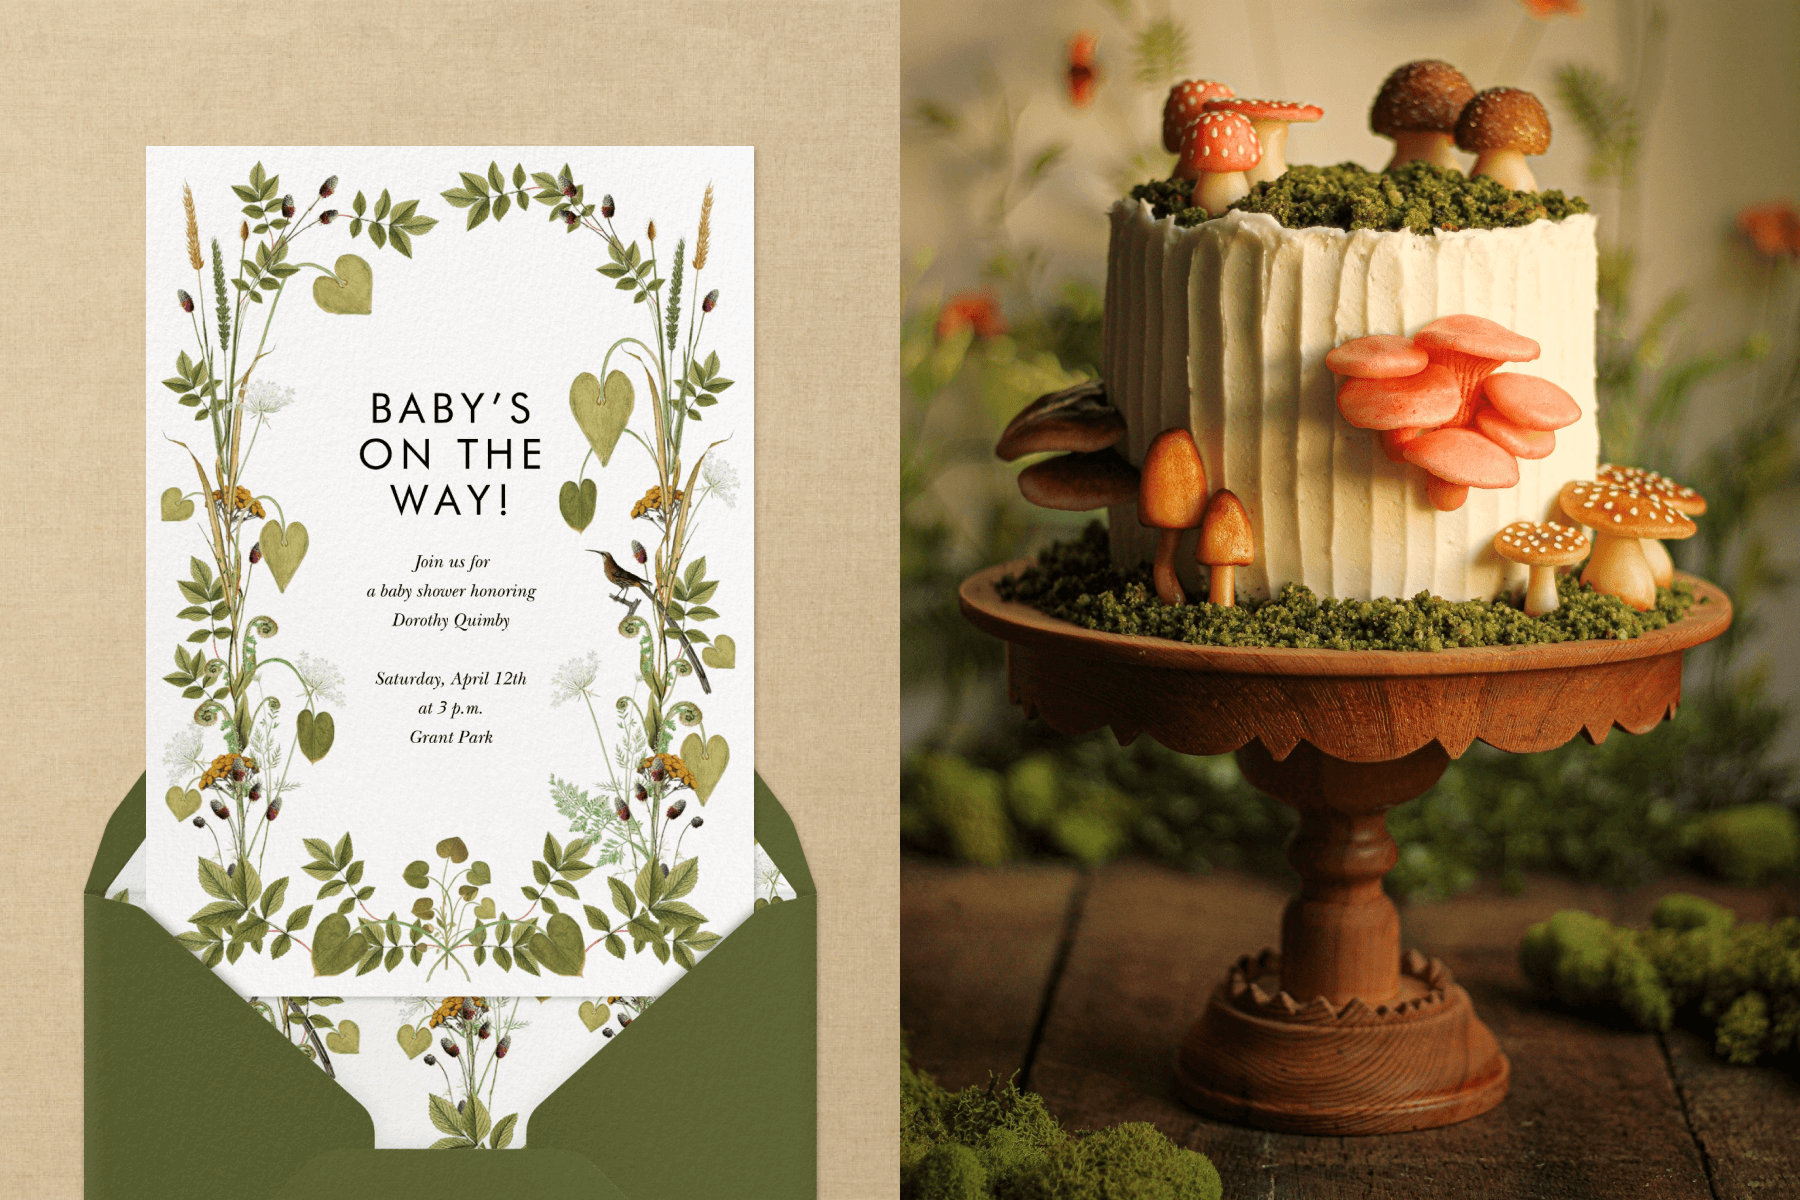 A white invitation reads “Baby’s on the way!” with delicate greenery and a few birds forming a border. Right: A layer cake with “mushrooms” growing off of it on a wooden pedestal stand.